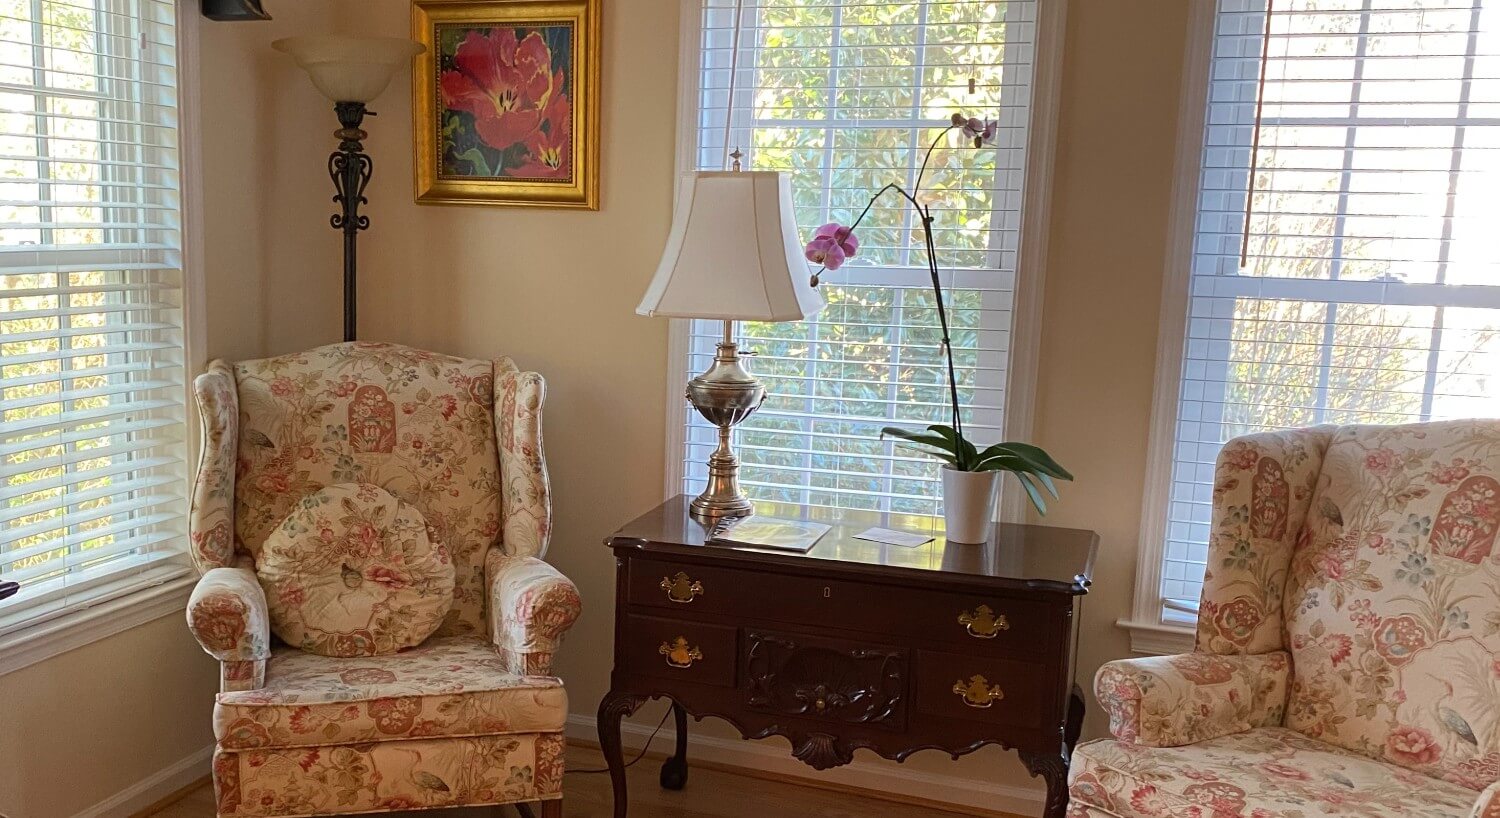 Two floral wingback sitting chairs and an antique table with a lamp and potted flower in front of three large windows